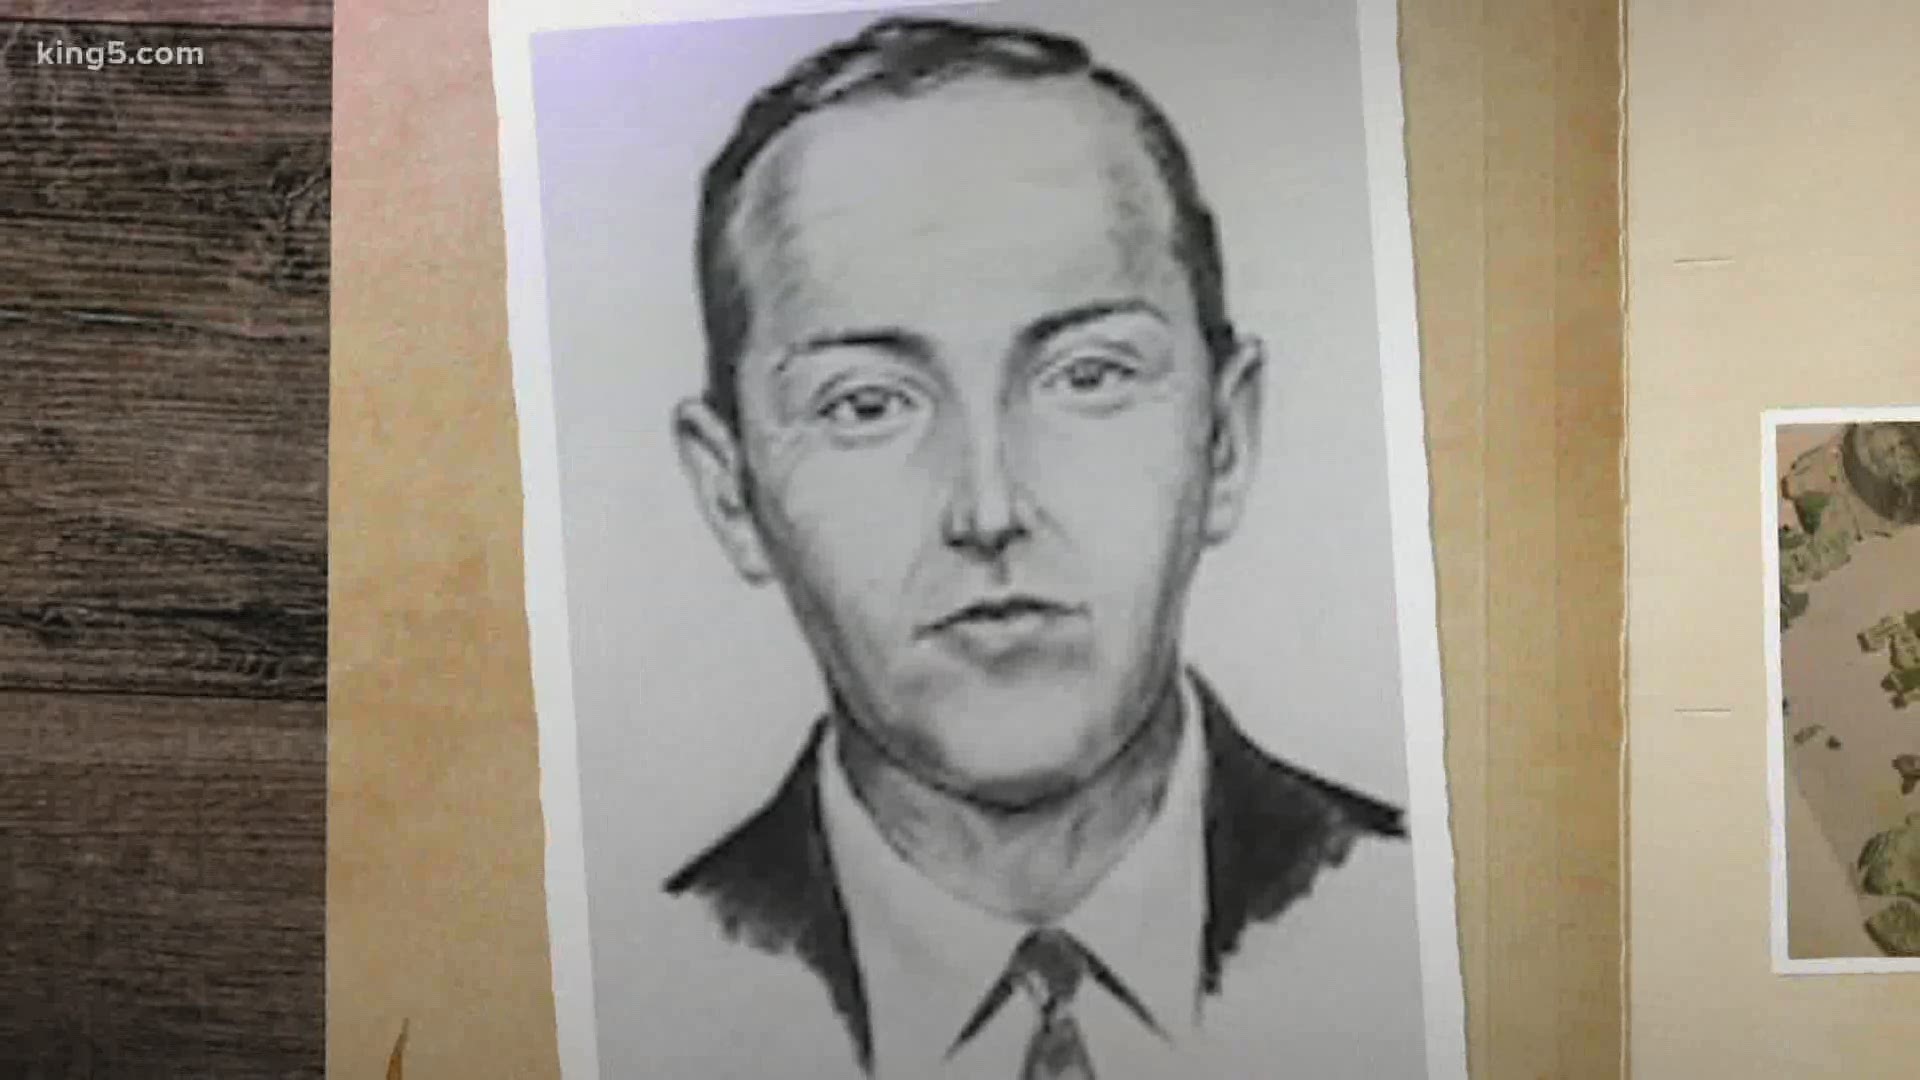 Using a microscope to identify seasonal 'diatoms,' Tom Kaye uncovered a new clue in the 49-year-old case of skyjacker DB Cooper.